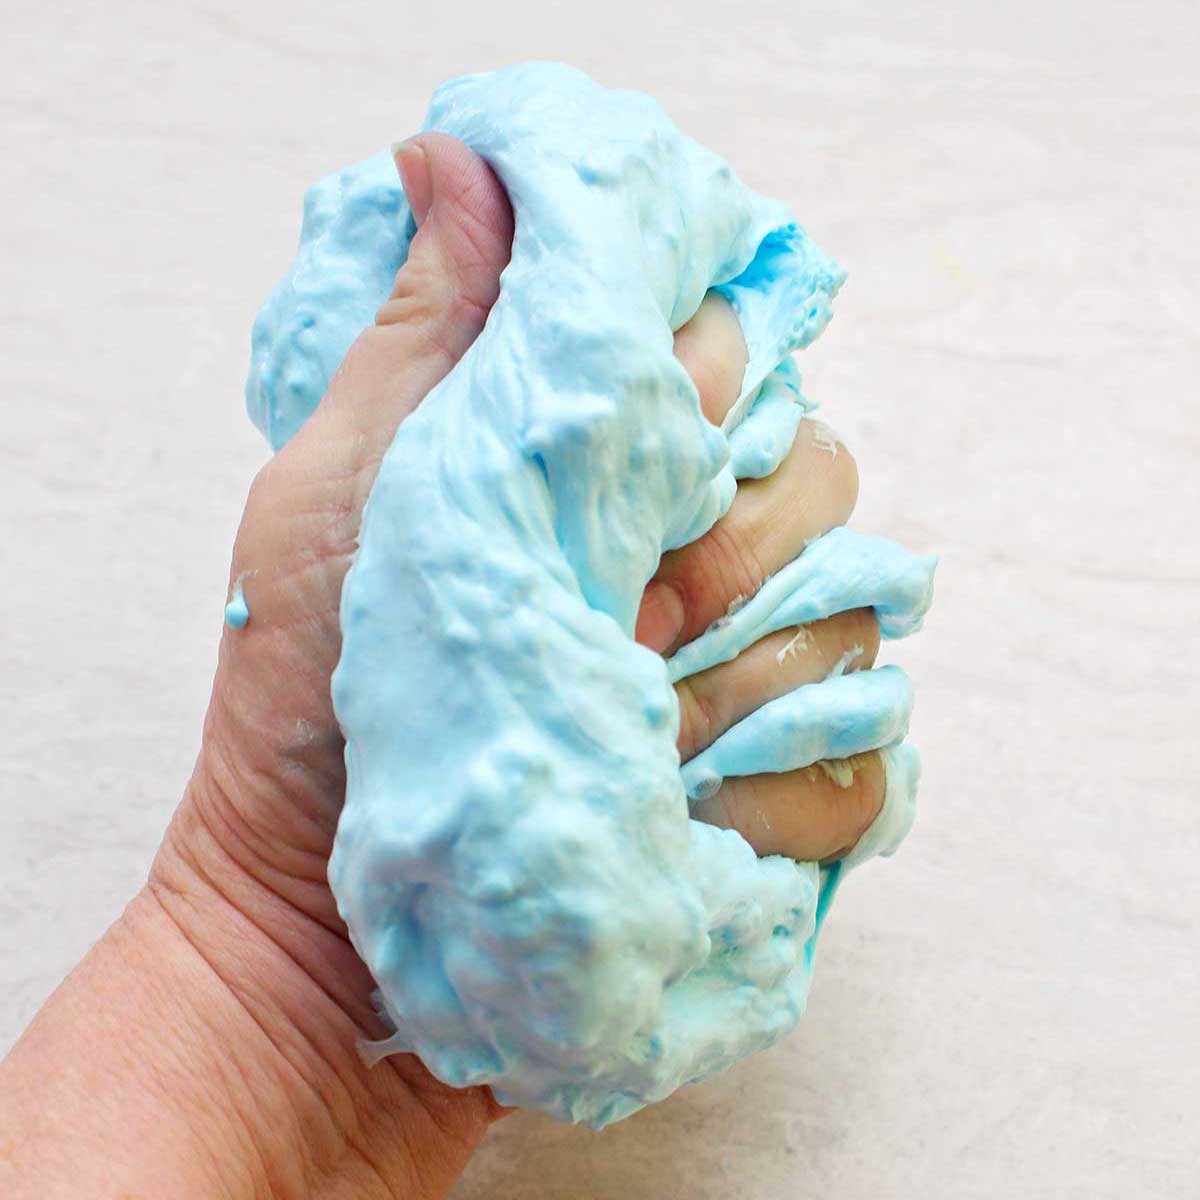 Buy Ultimate Slime Activator Borax For Making all Slimes